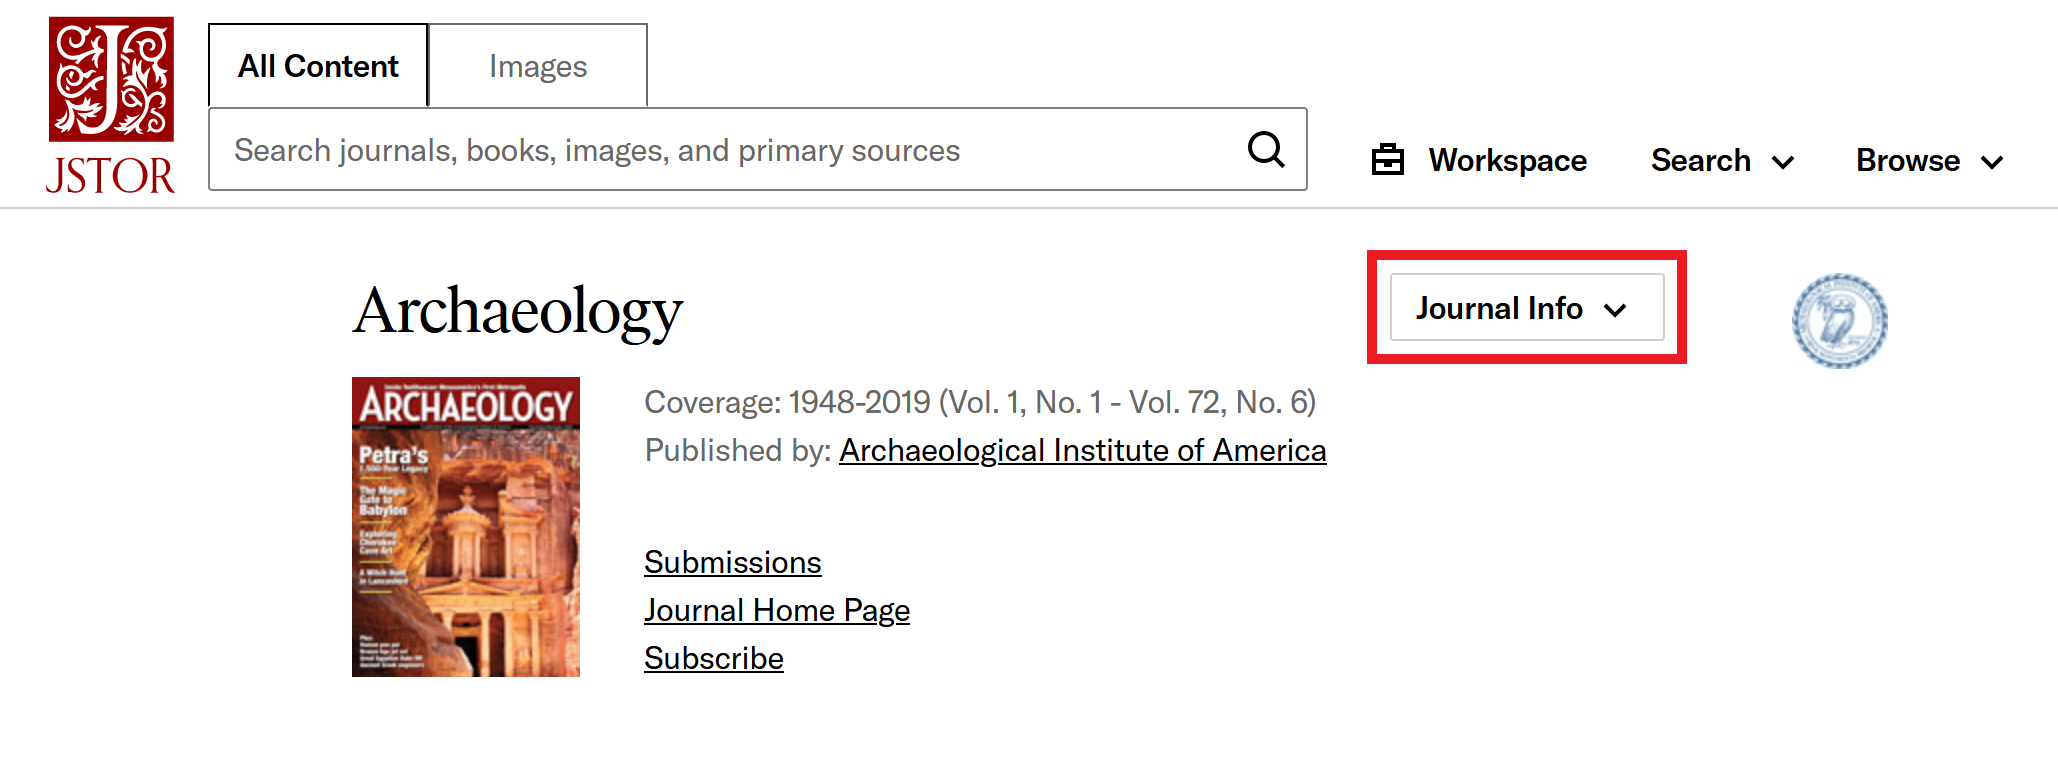 Journal Info button on a journal page